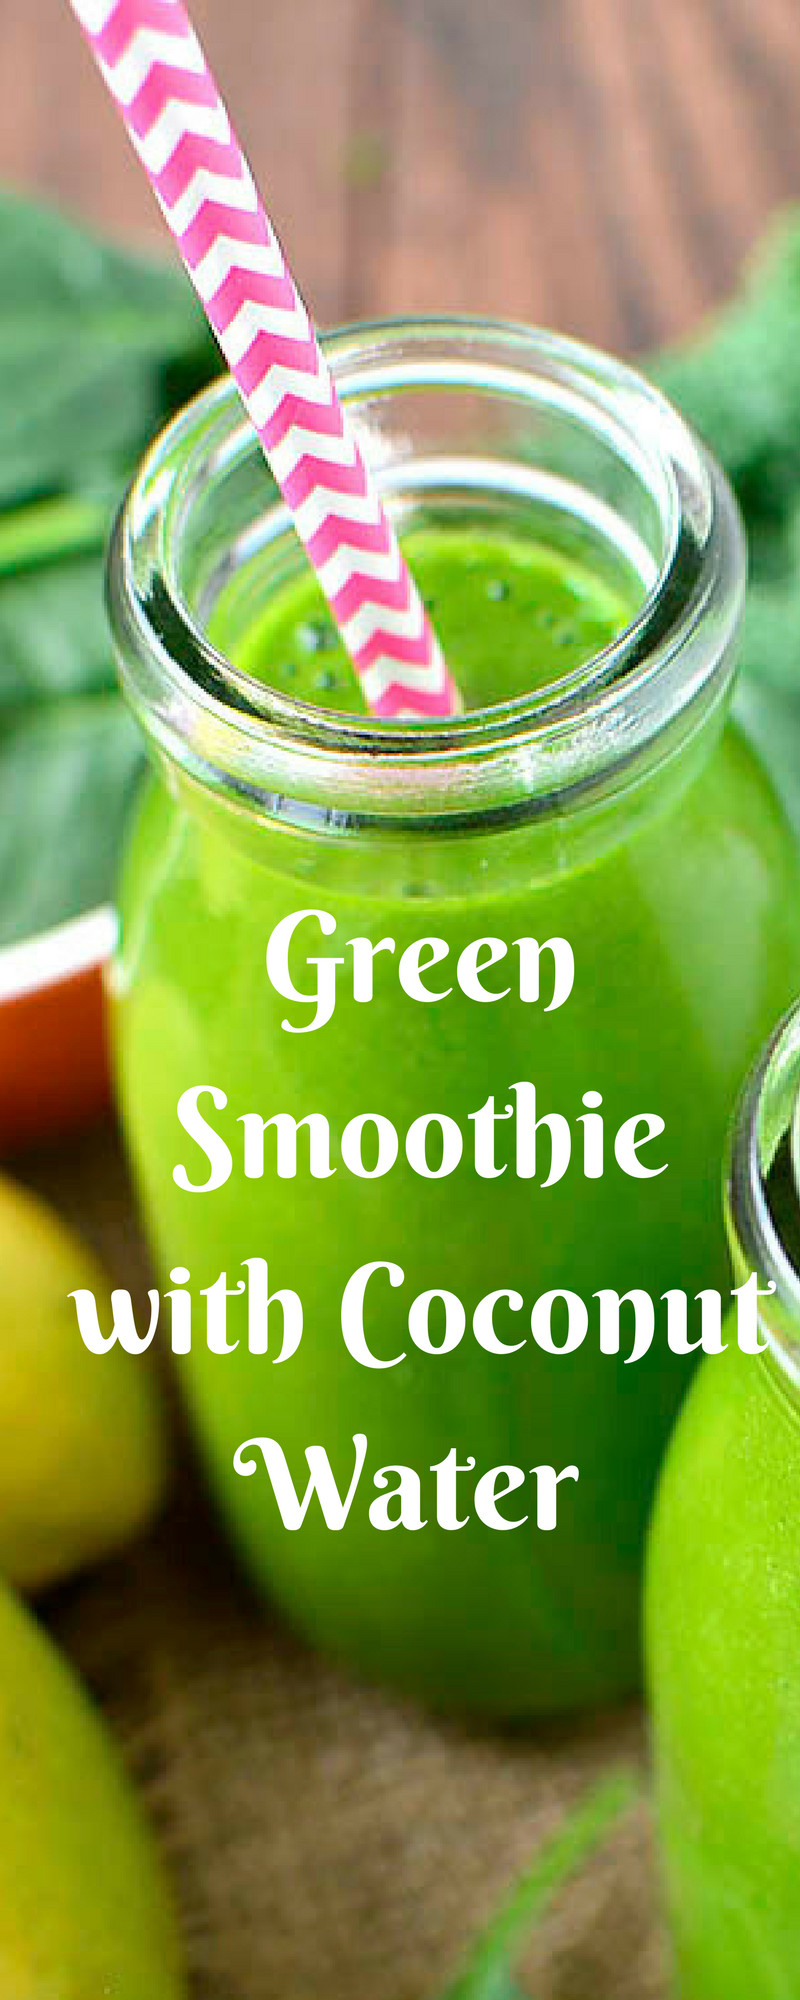 Coconut Water Smoothie Recipes
 Tropical Green Smoothie Recipe